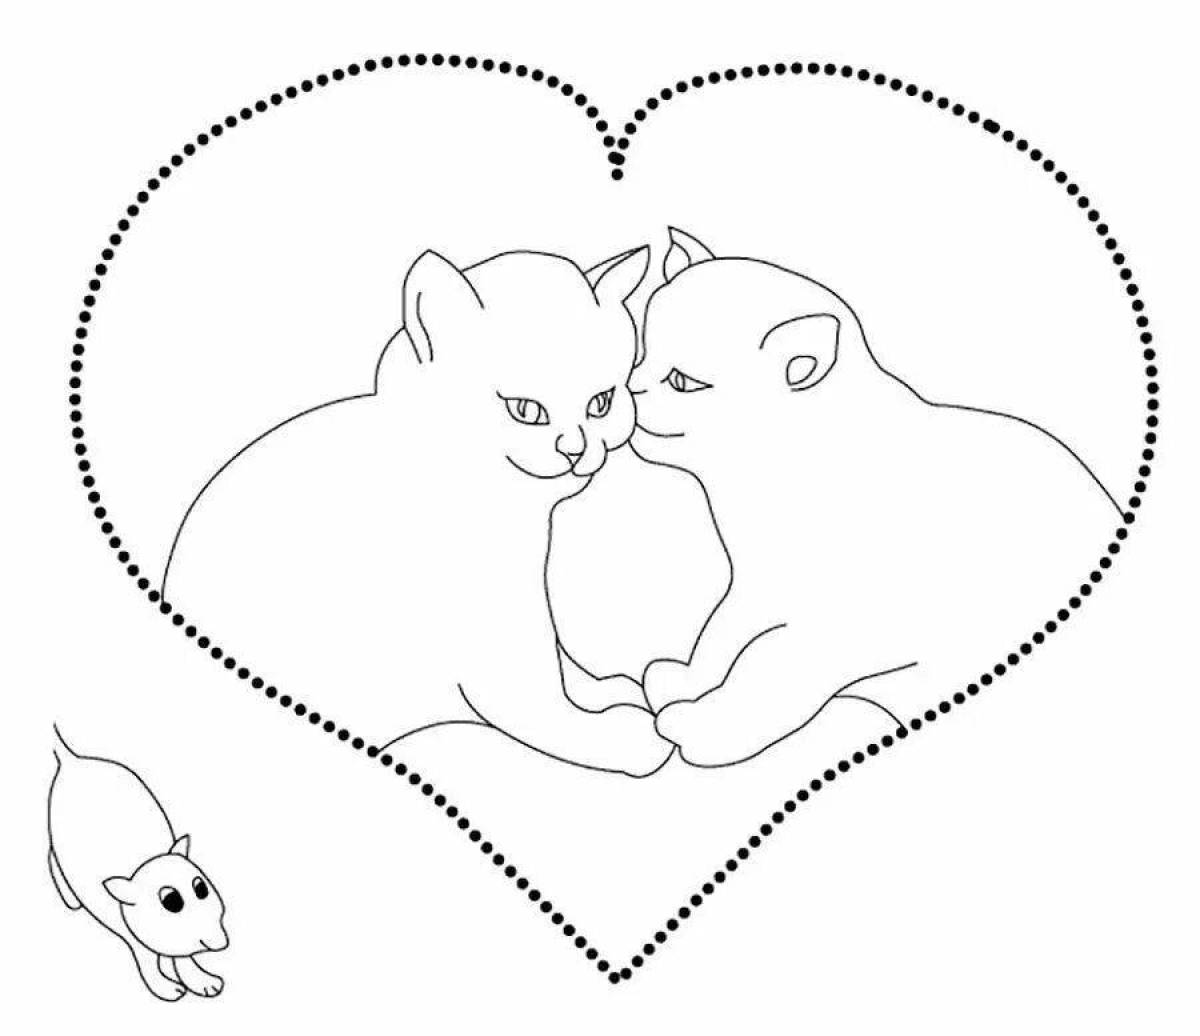 Coloring page inquisitive cat with a heart